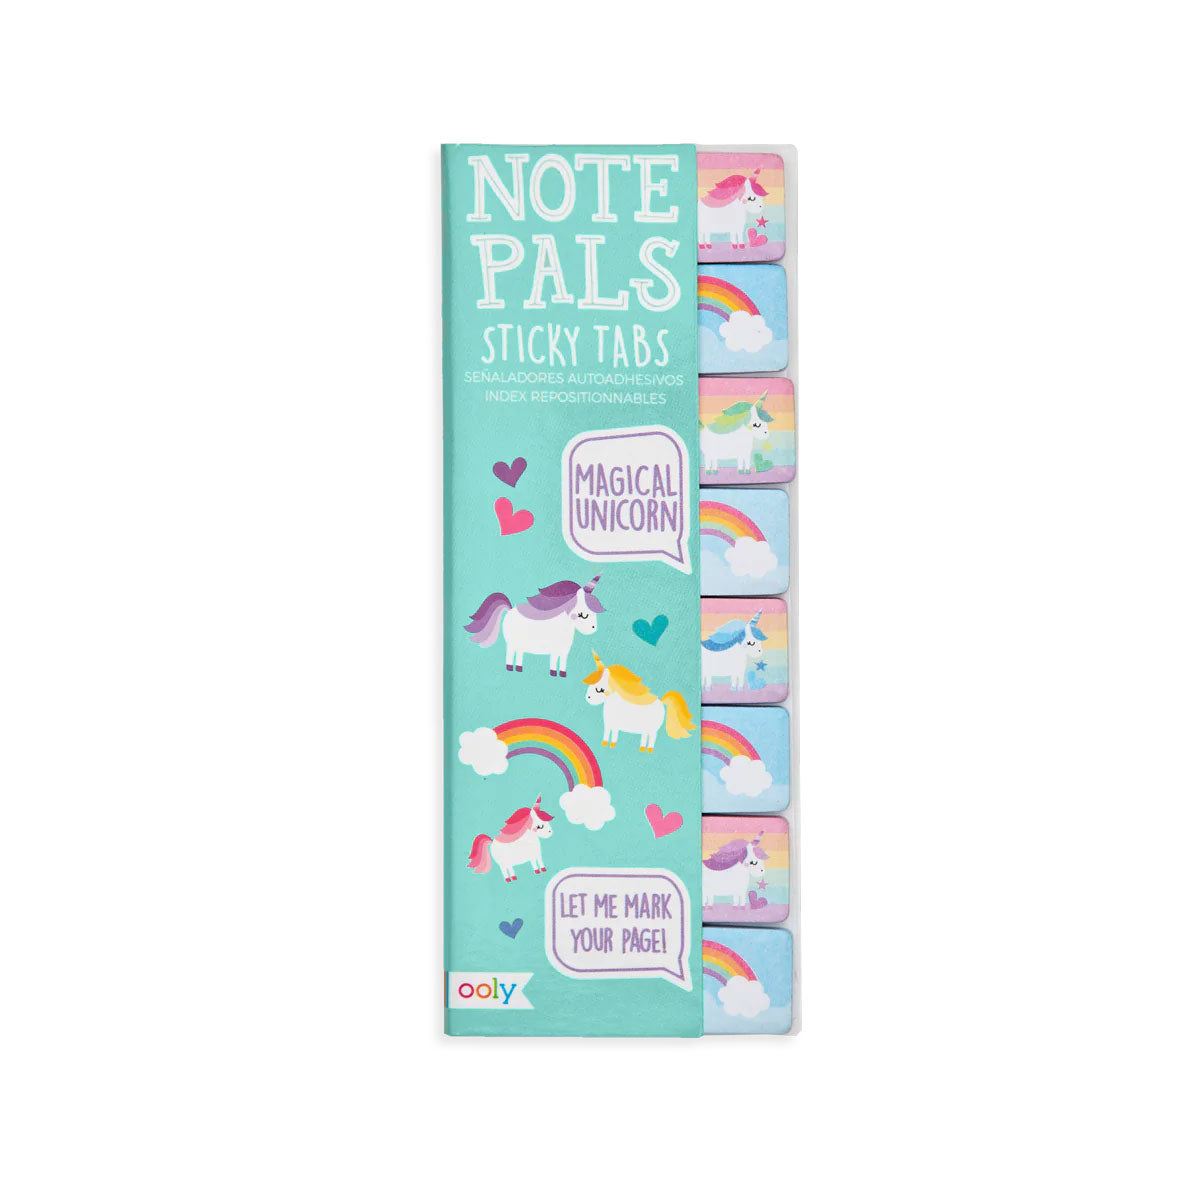 Ooly Magical Unicorn Note Pals Sticky Tabs